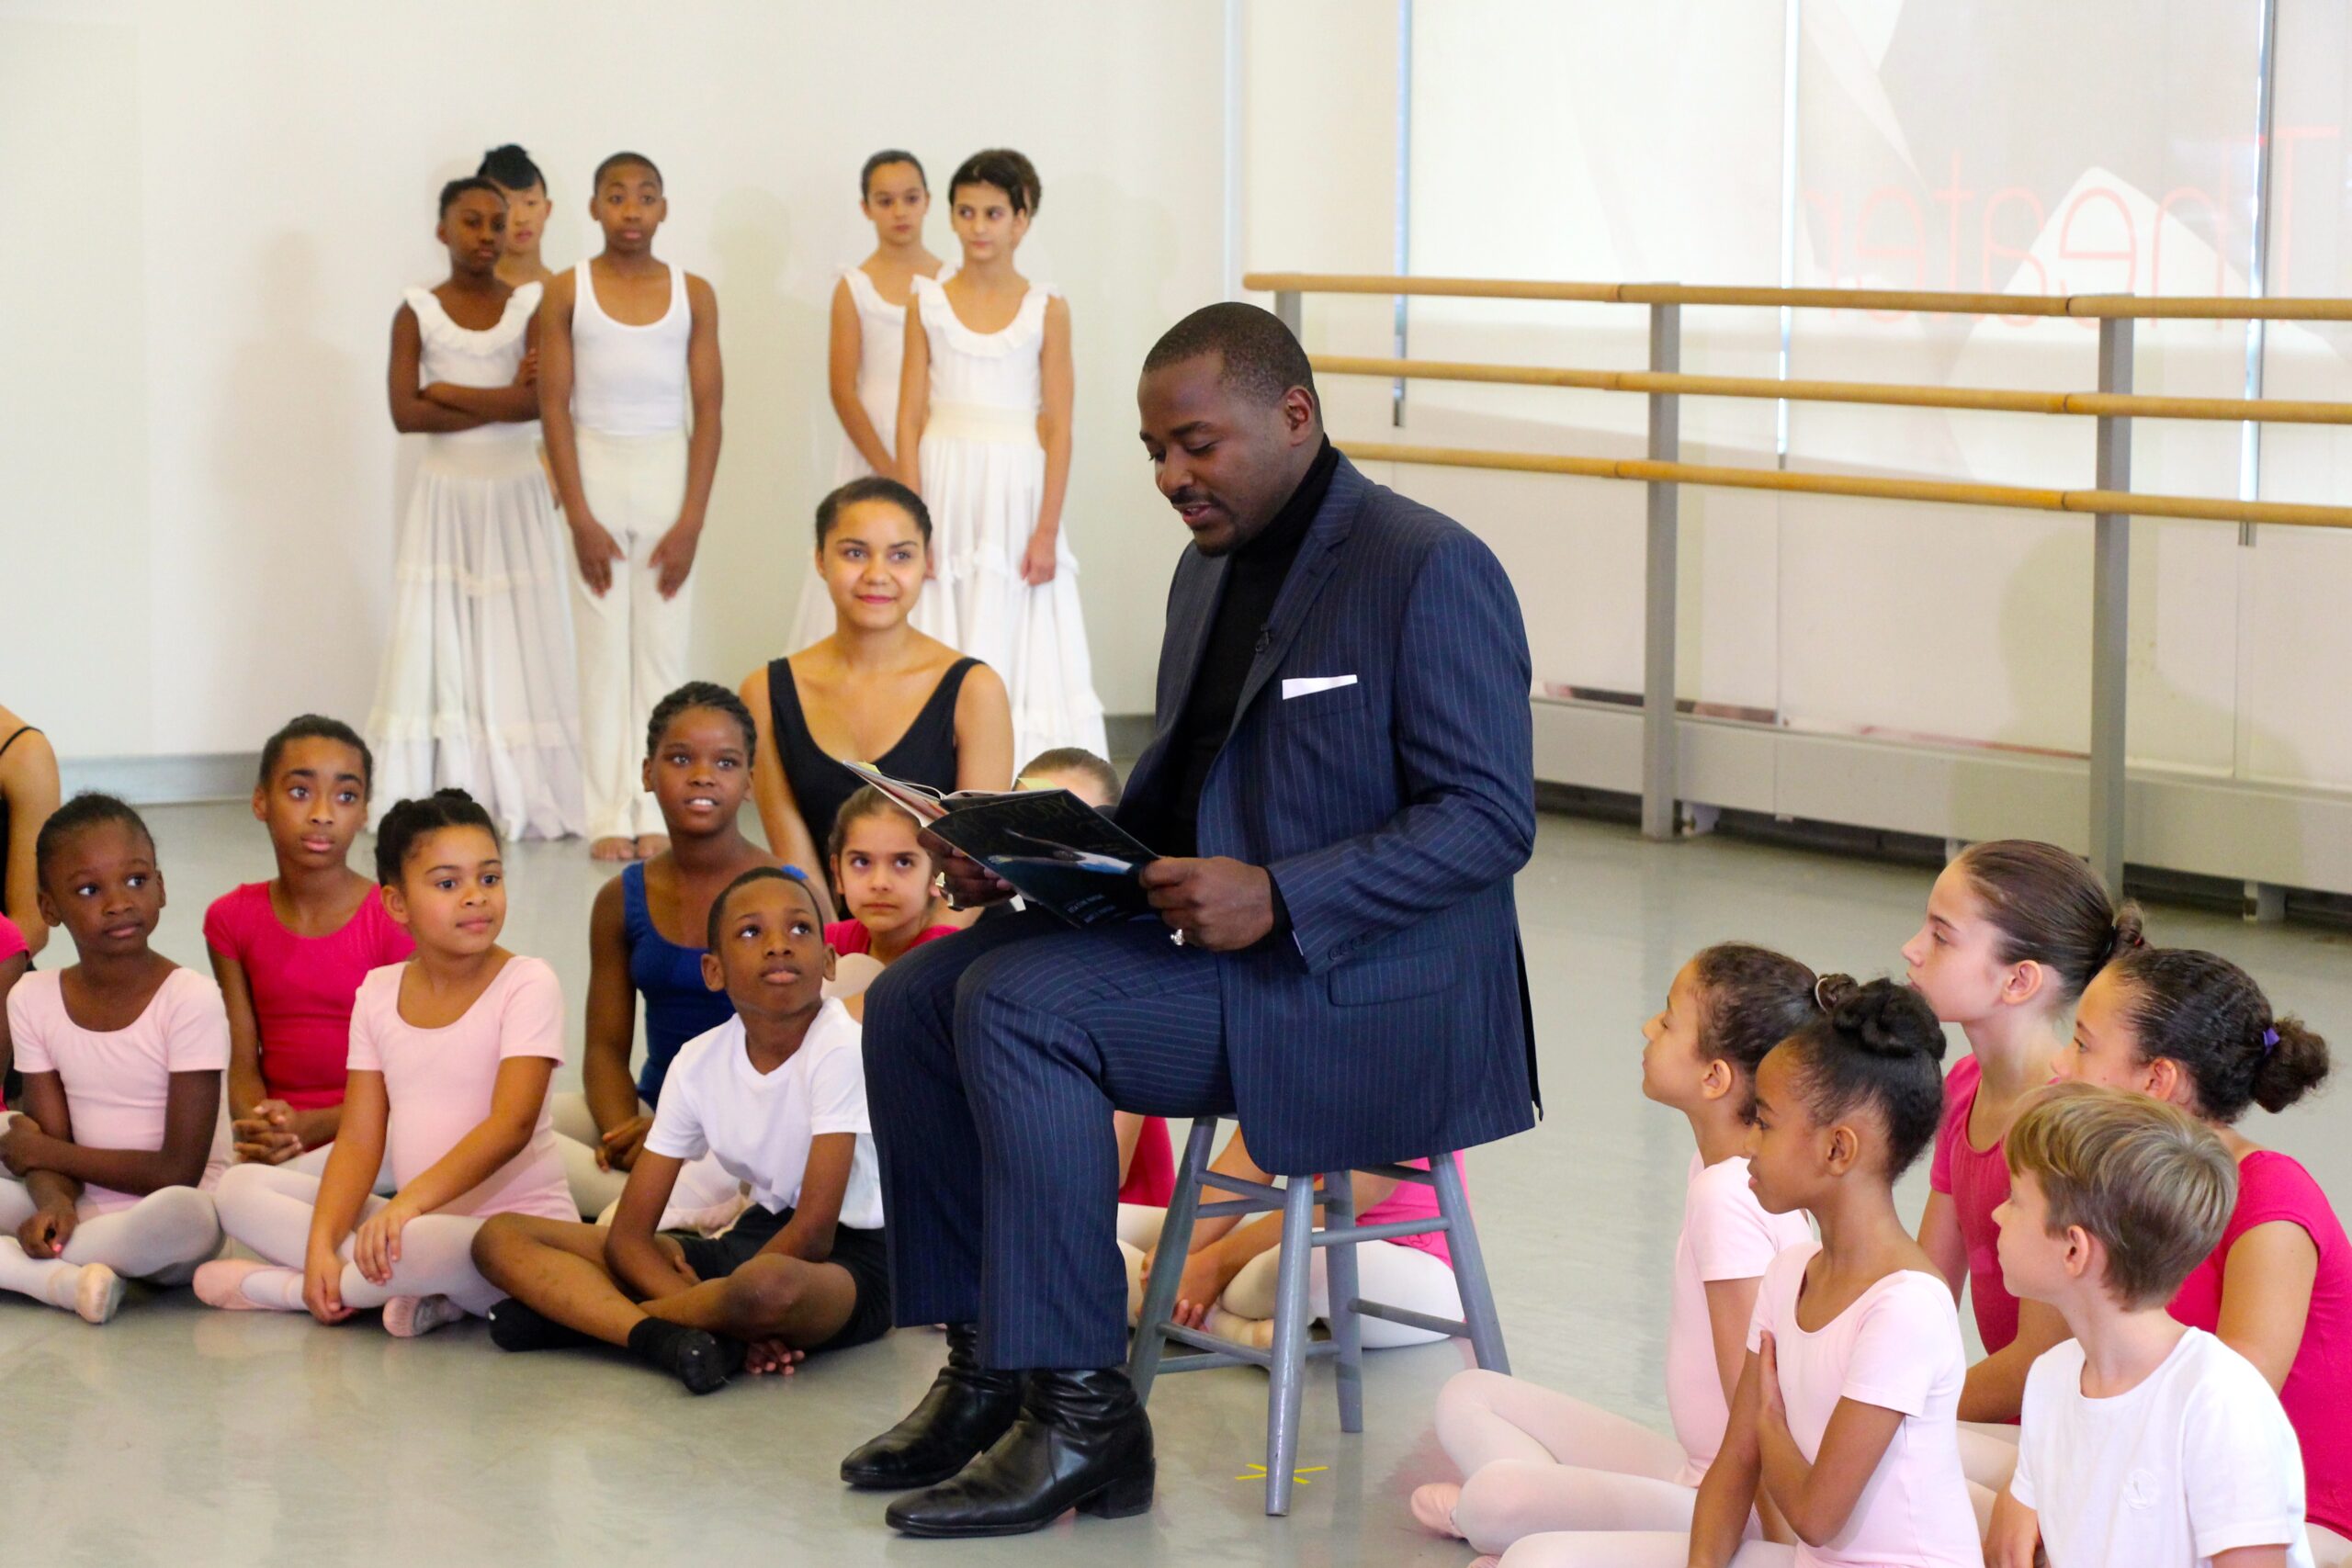 Robert Battle sits on a chair reading aloud from a book. Young students in dance clothes sit arrayed around him, listening.